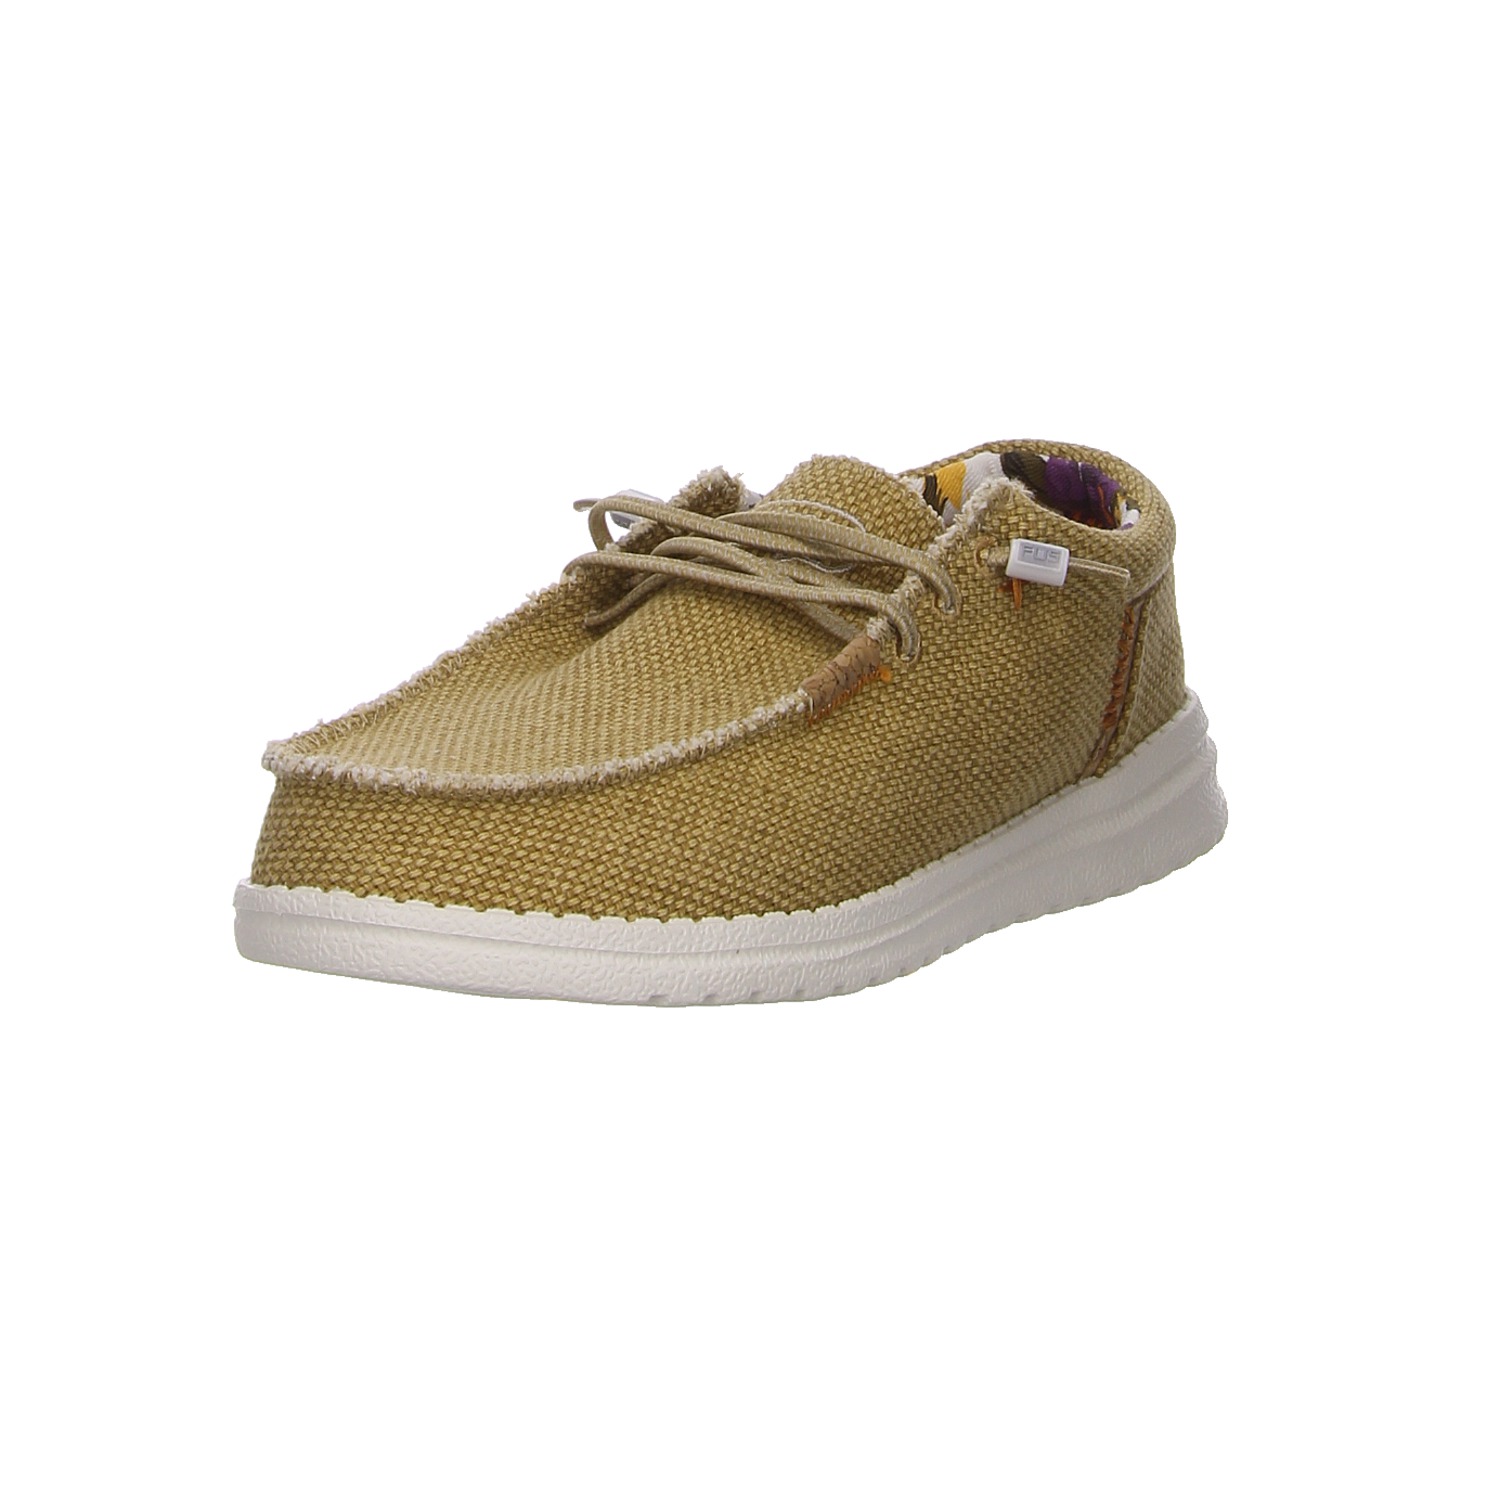 Fusion Bequeme Schuhe Jack jute ginger